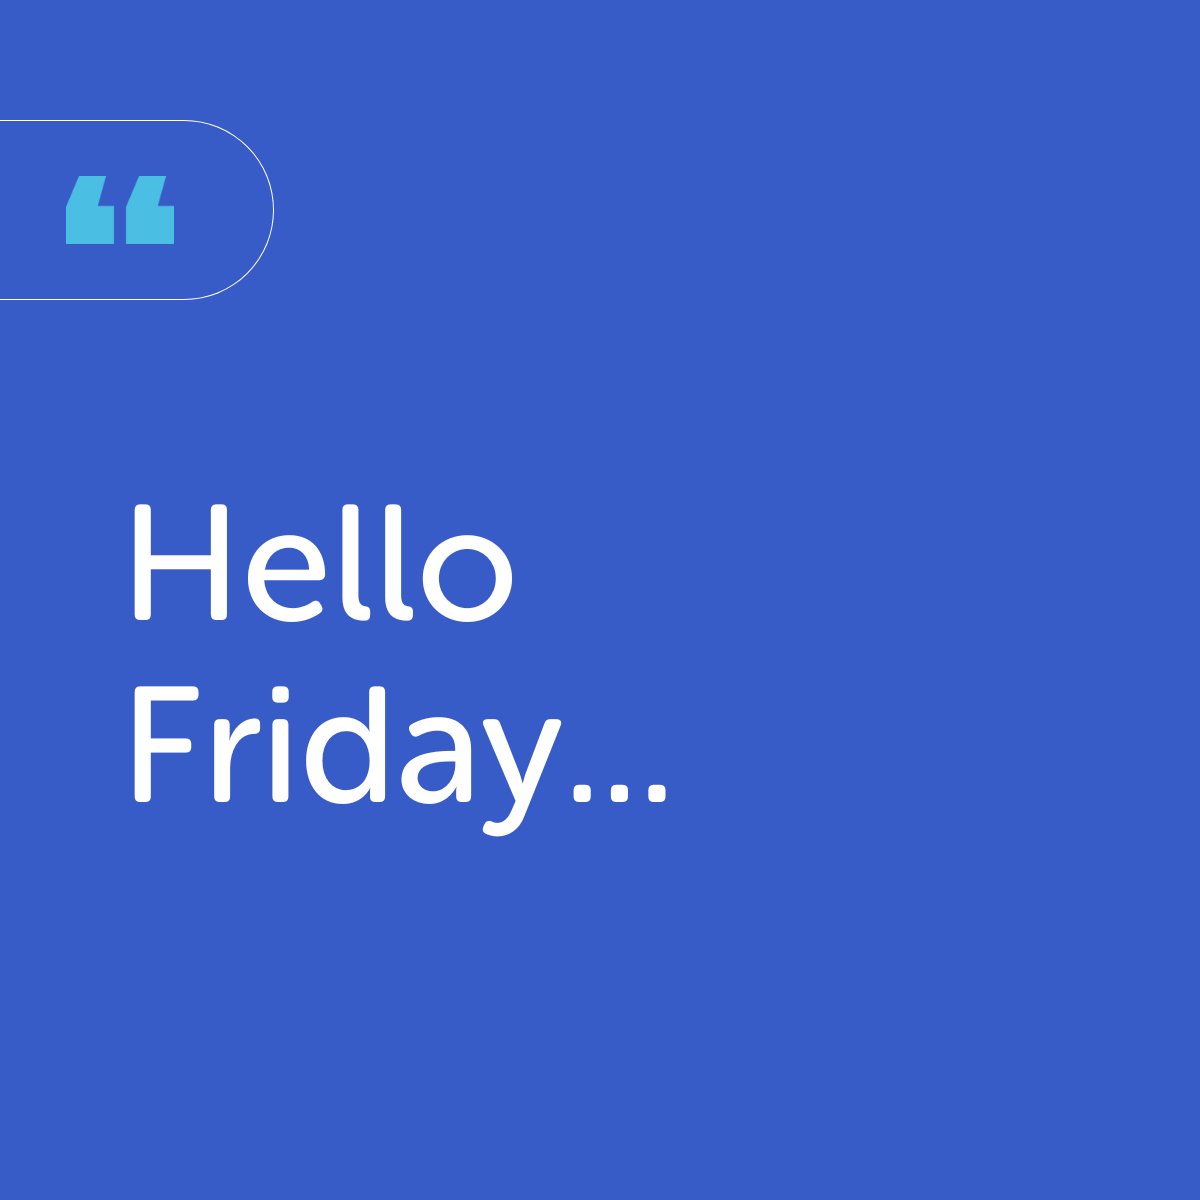 The weekend is calling 📲 after another action-packed week at Aergo Health HQ! ✅ We've been following up with our Aerseat Try-It applicants ✅ Getting Aerseat units packed and shipped ✅ Checking in on our early adopters Wishing you all a restful weekend!